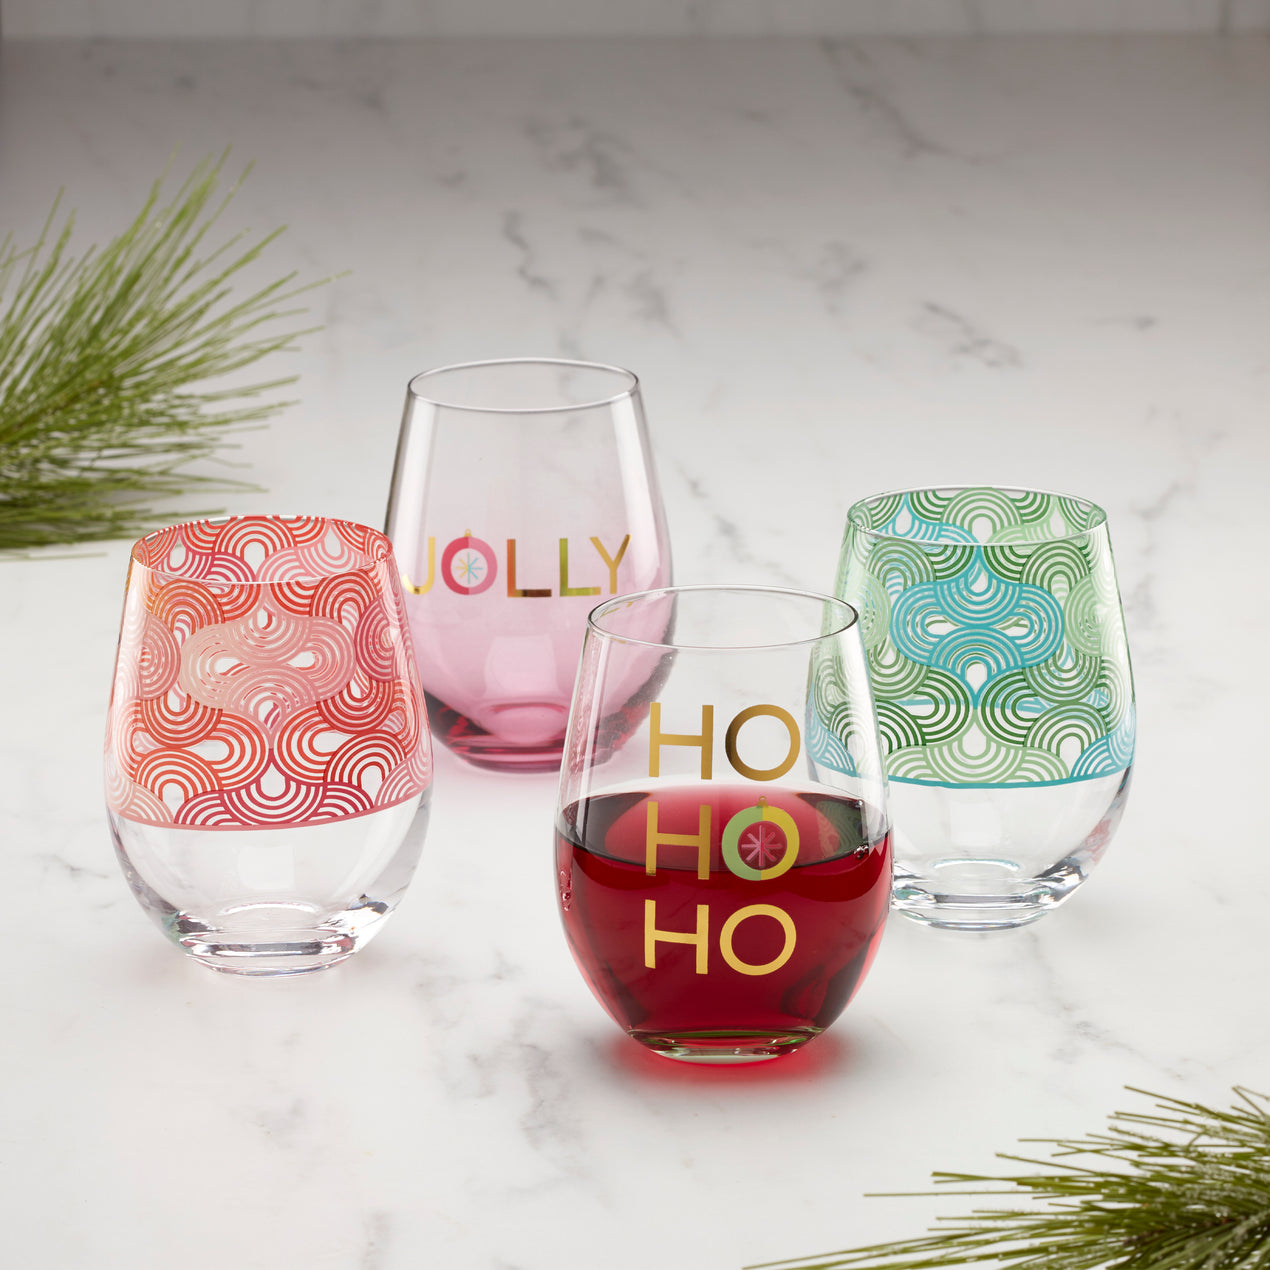 Candy Cane Stemless Wine Glasses ~ Set of 4